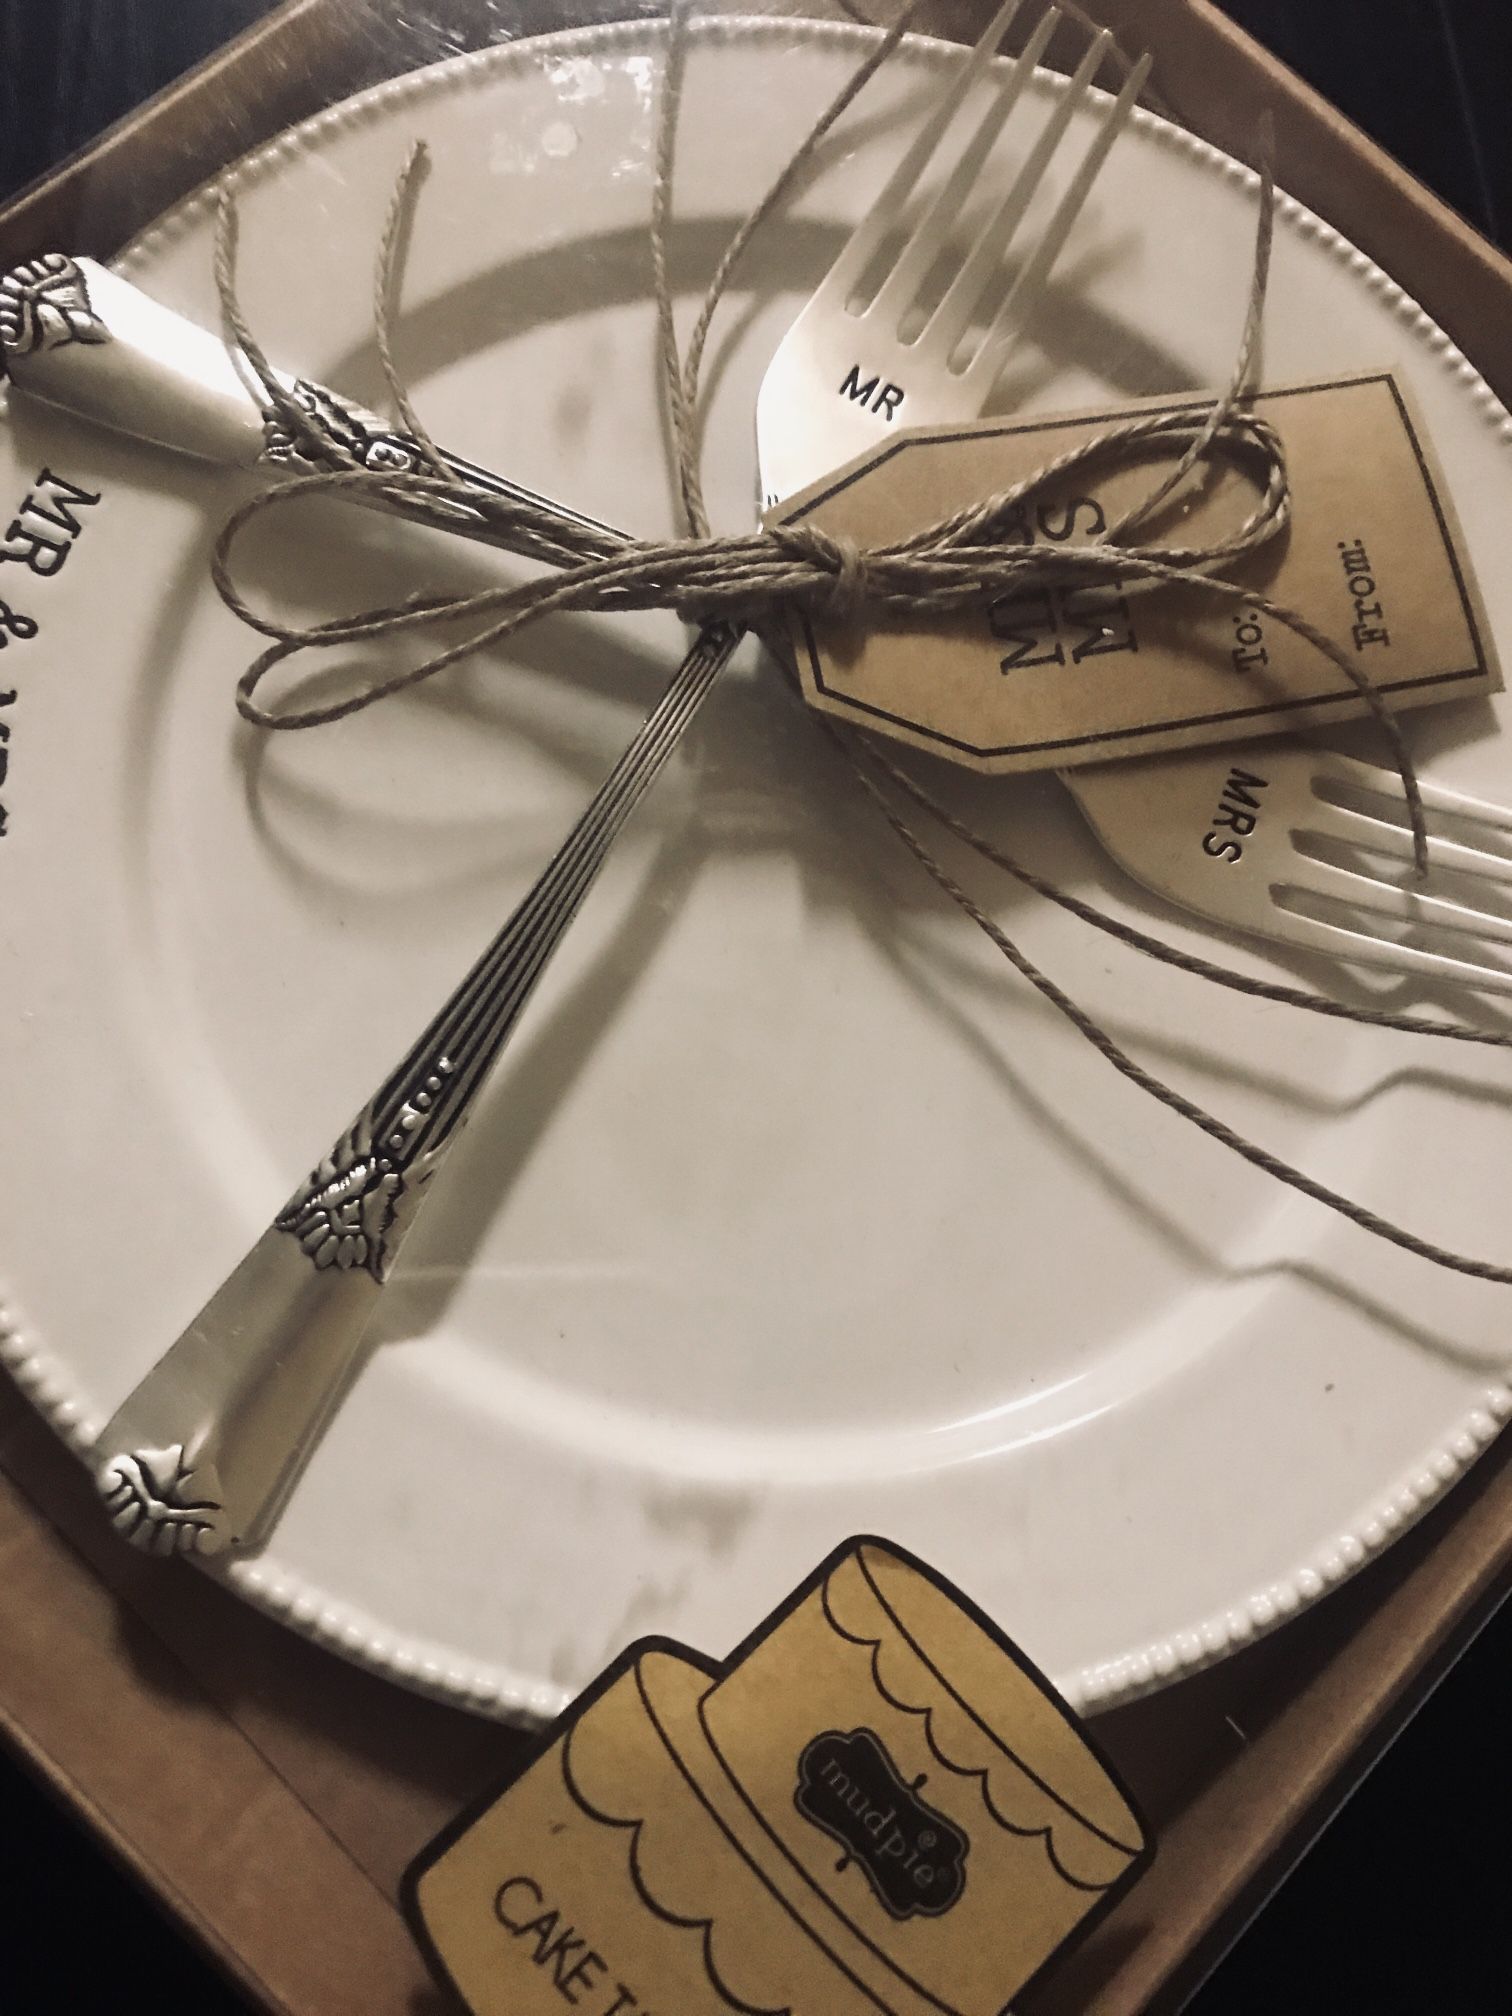 Mr. & Mrs. Cake Plate With Forks